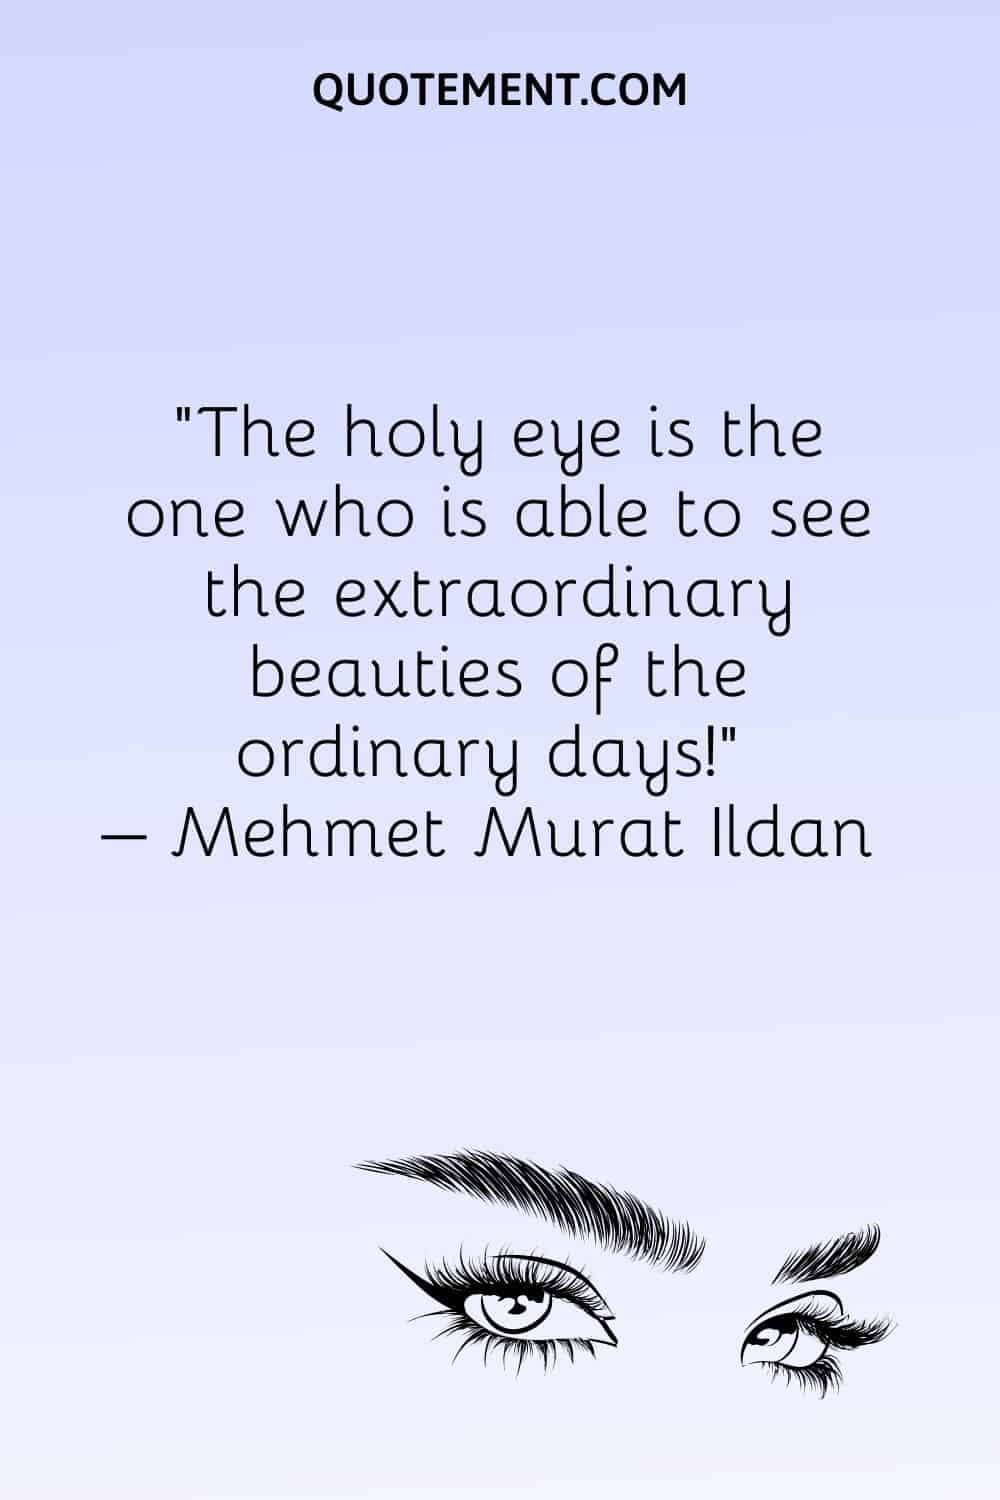 The holy eye is the one who is able to see the extraordinary beauties of the ordinary days